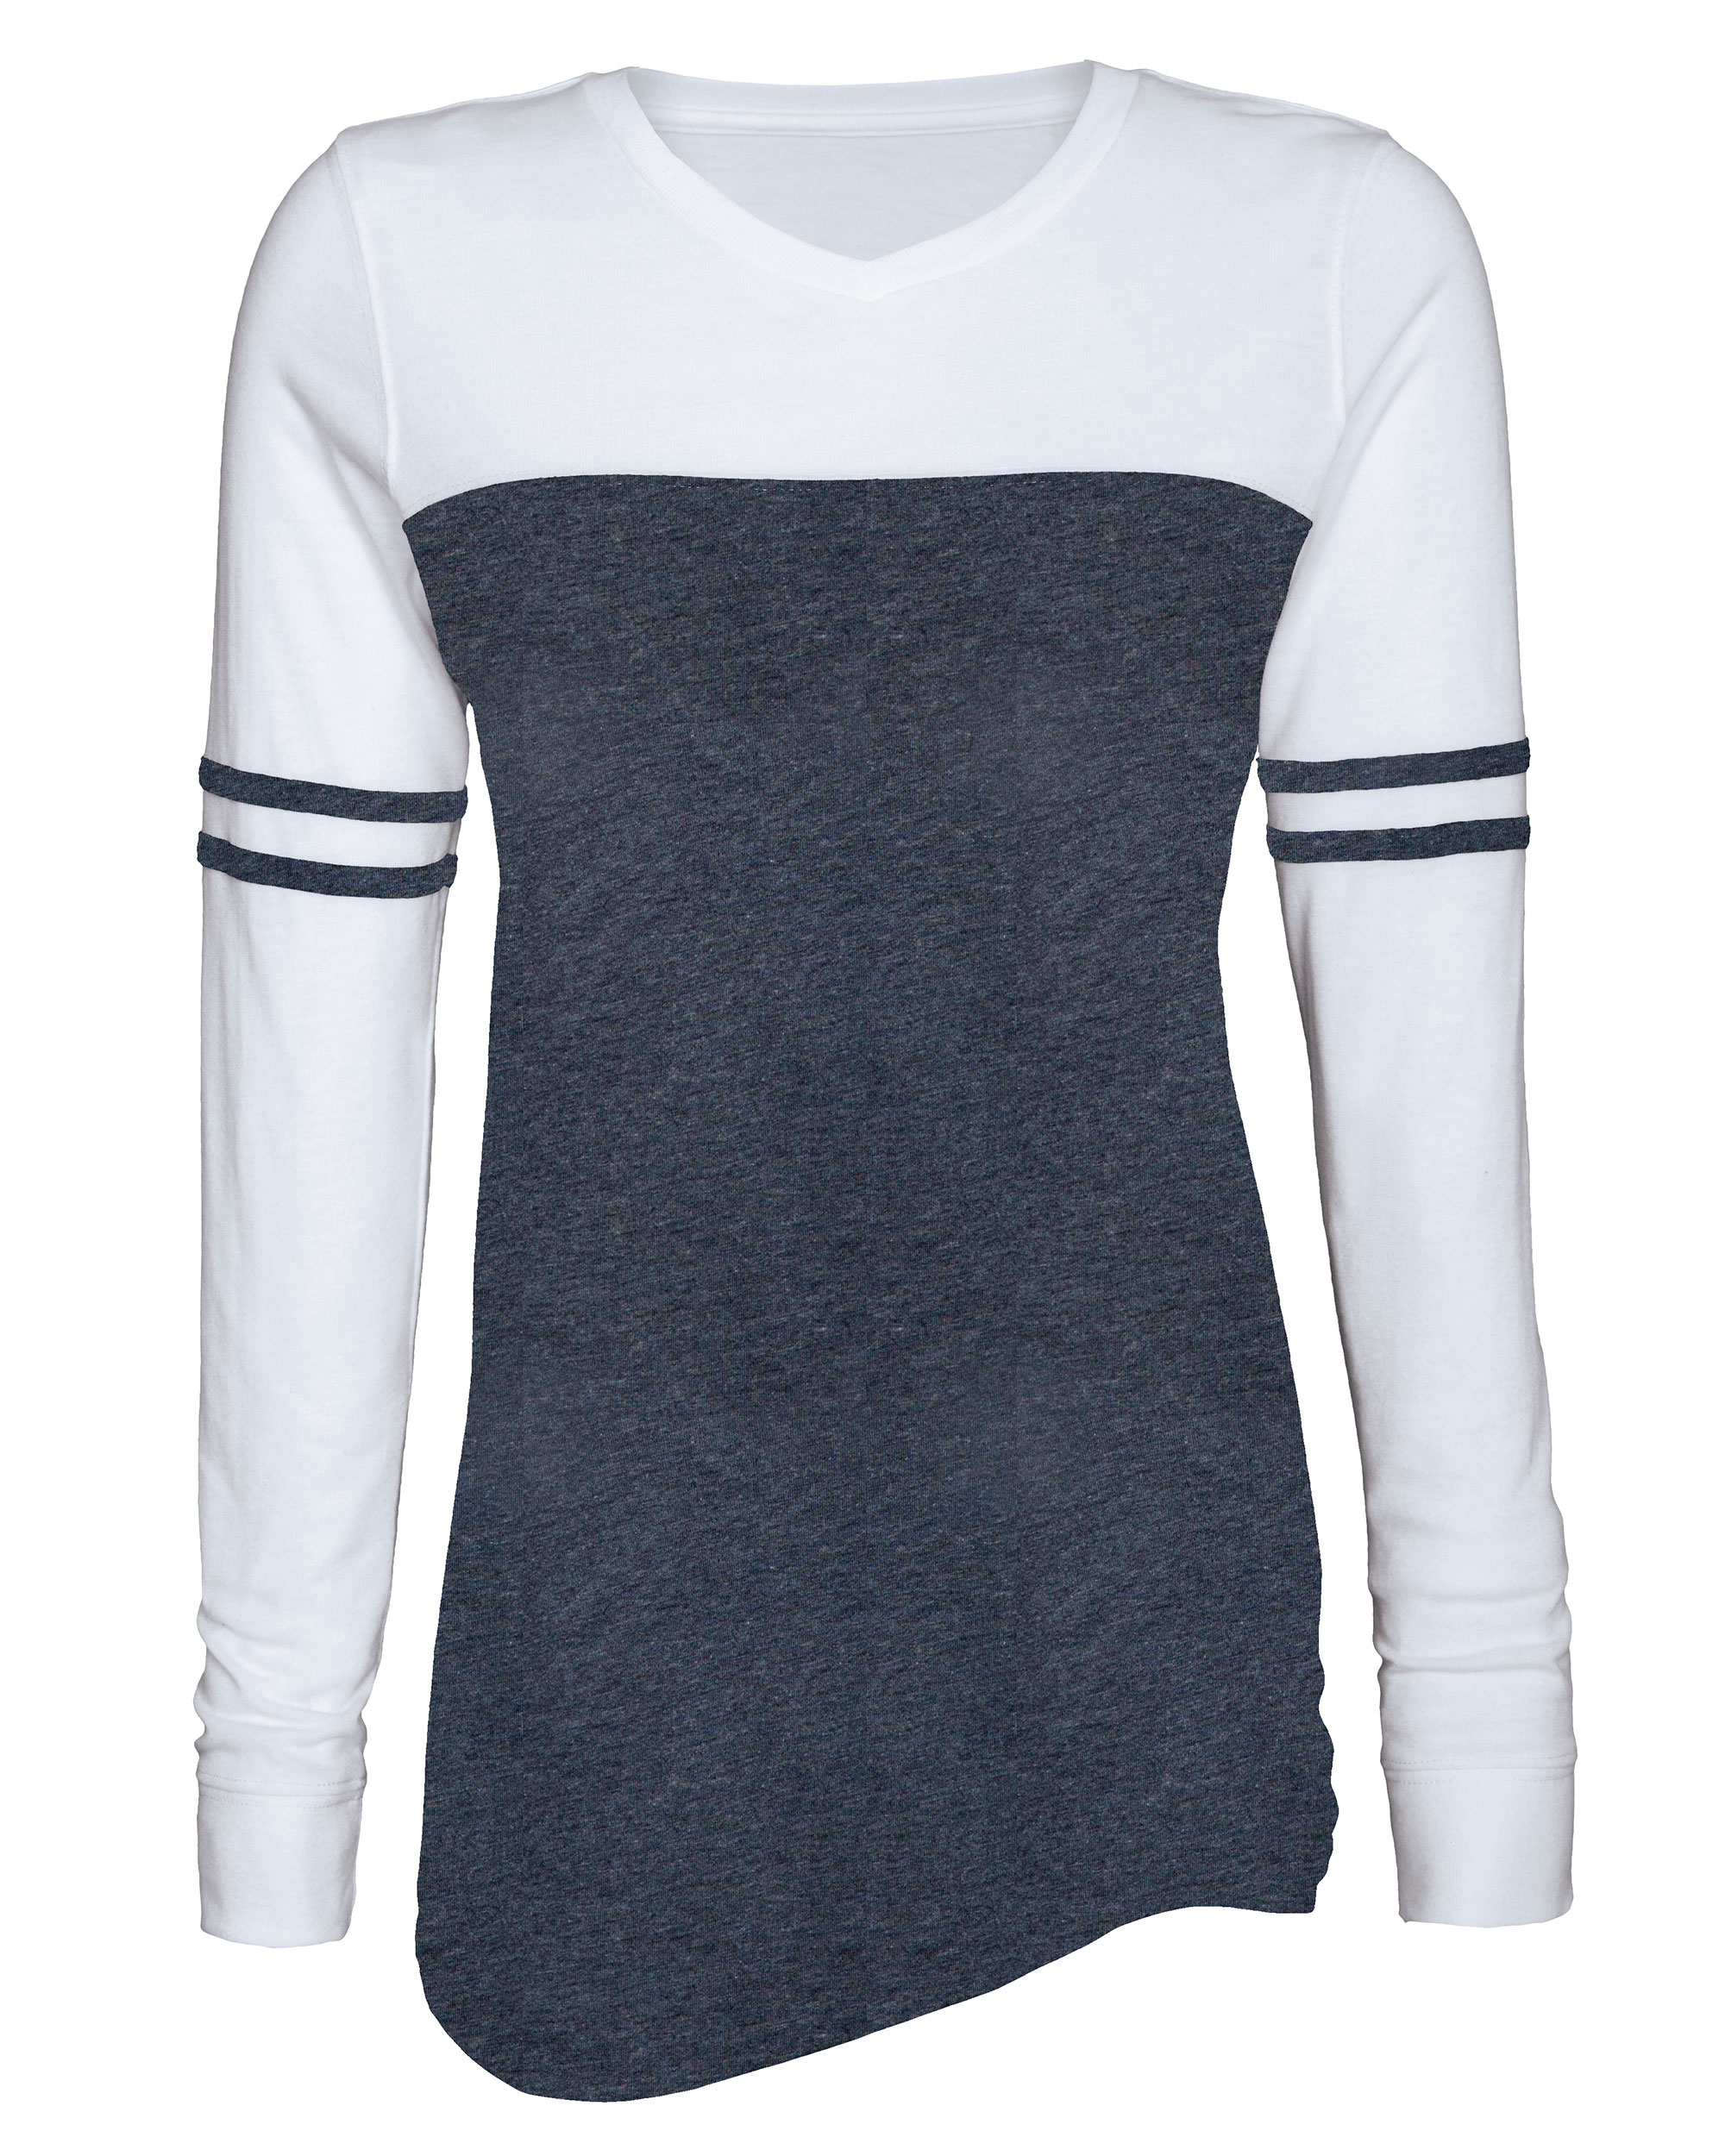 click to view Heather Navy/White